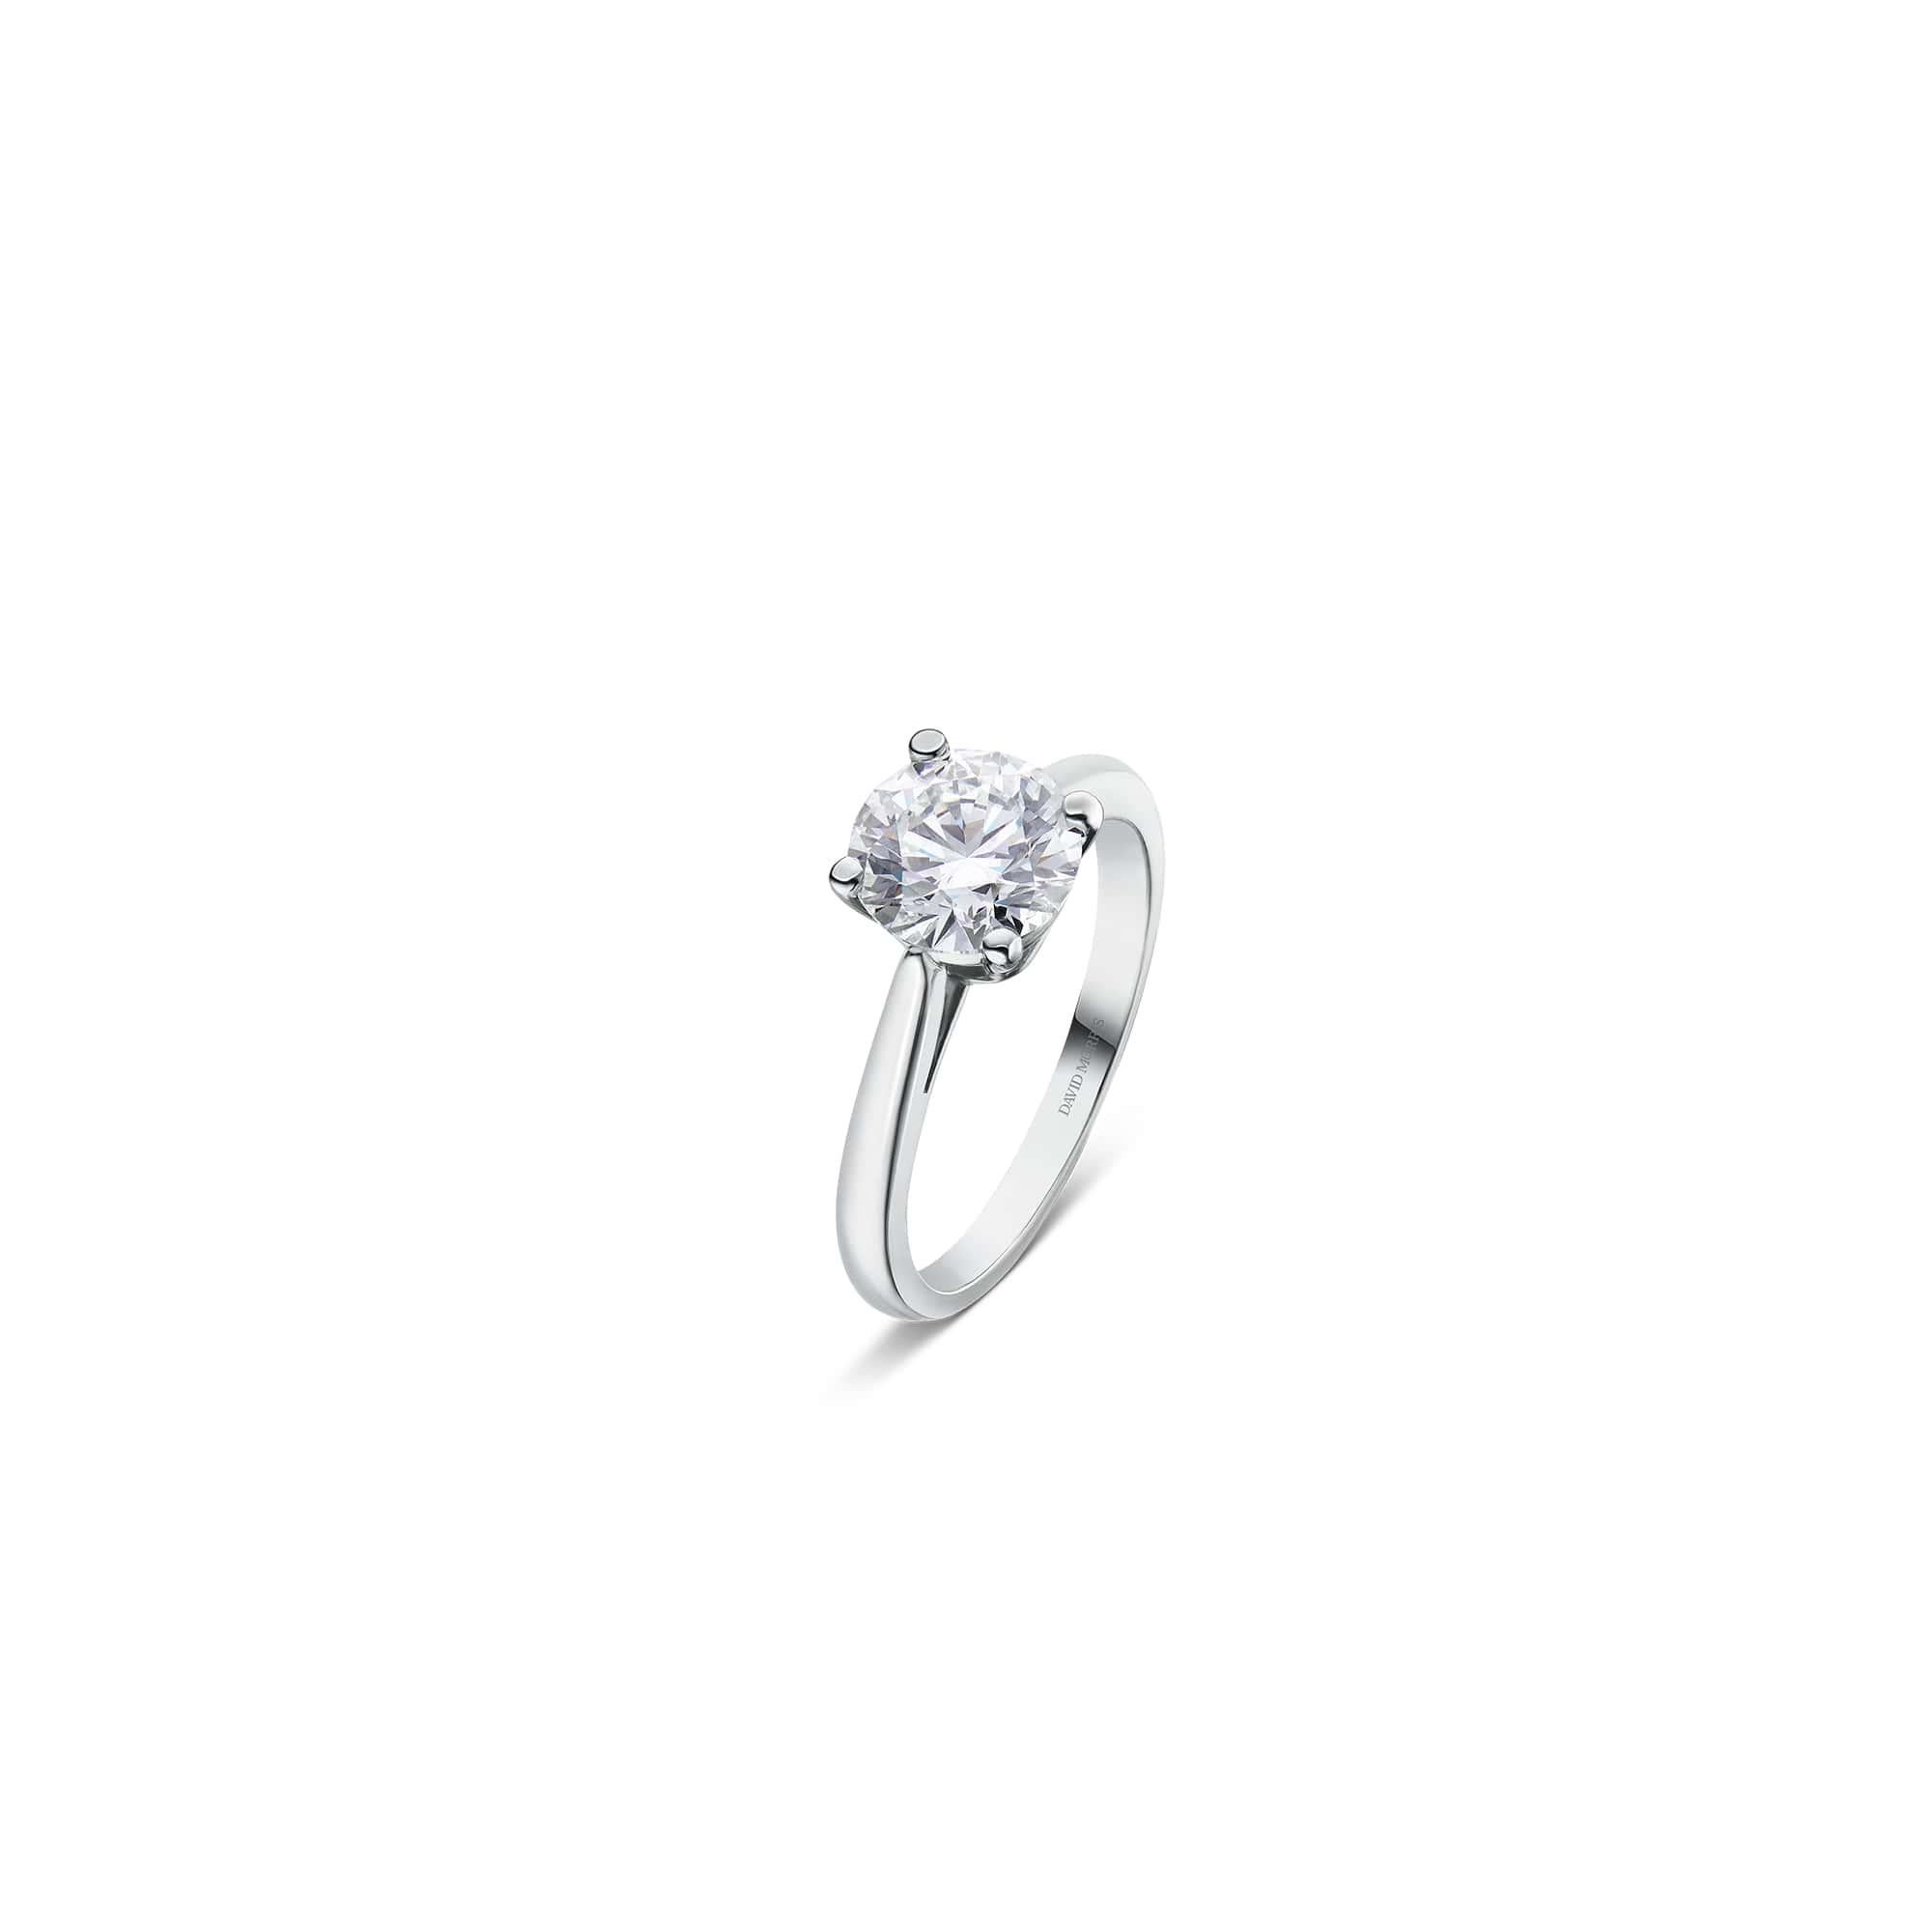 David Morris 1.54 Carat Round White Diamond Platinum Solitaire Ring In New Condition For Sale In London, GB